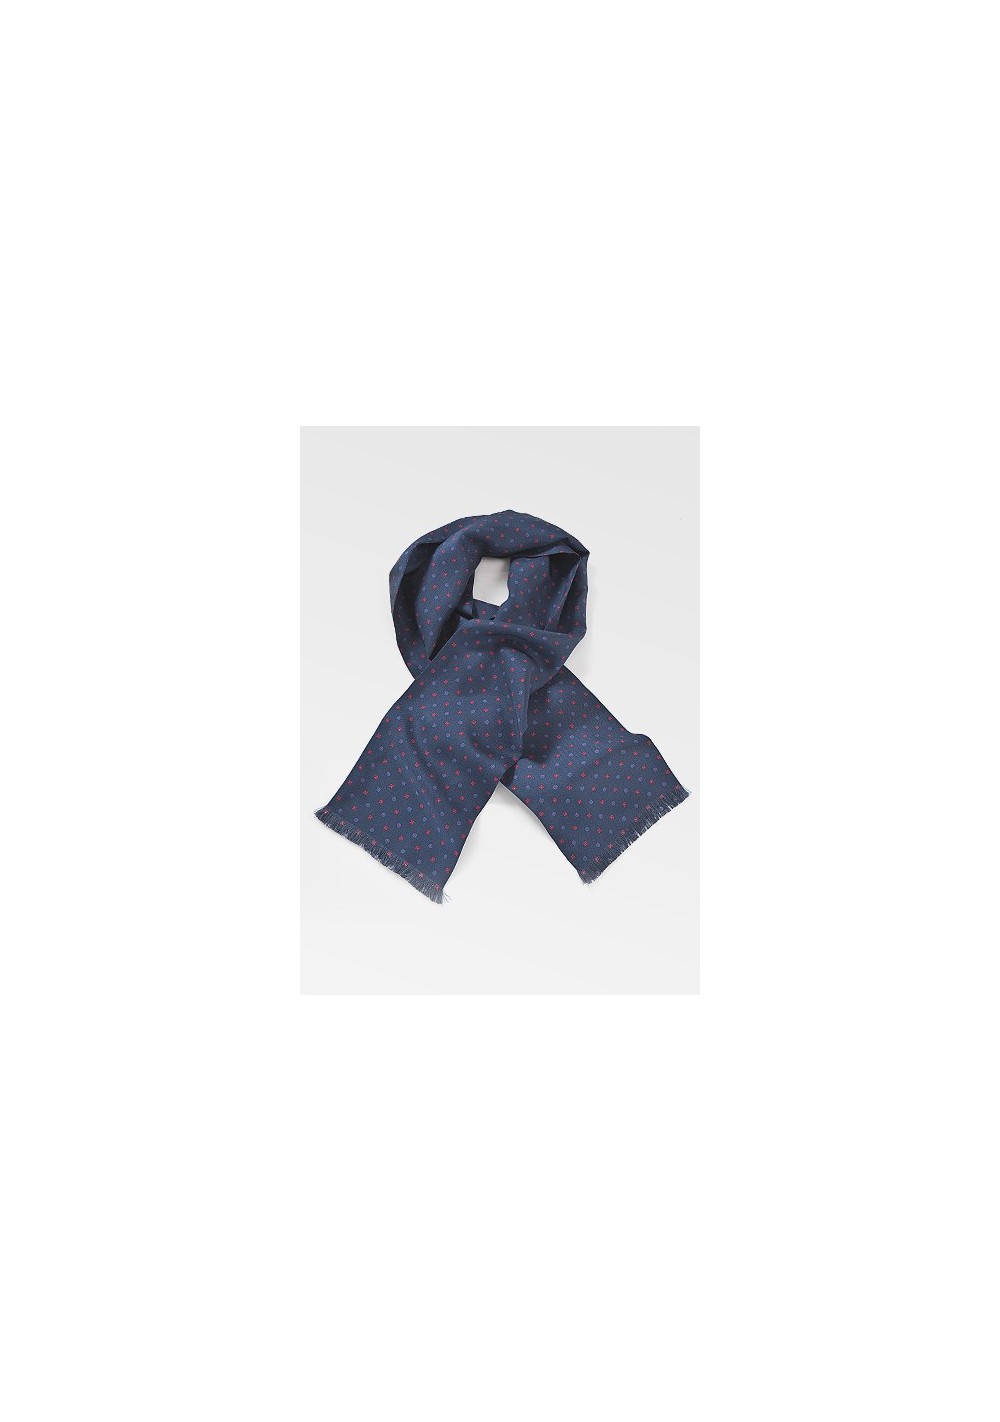 Geometric Floral Scarf in Navy Blue